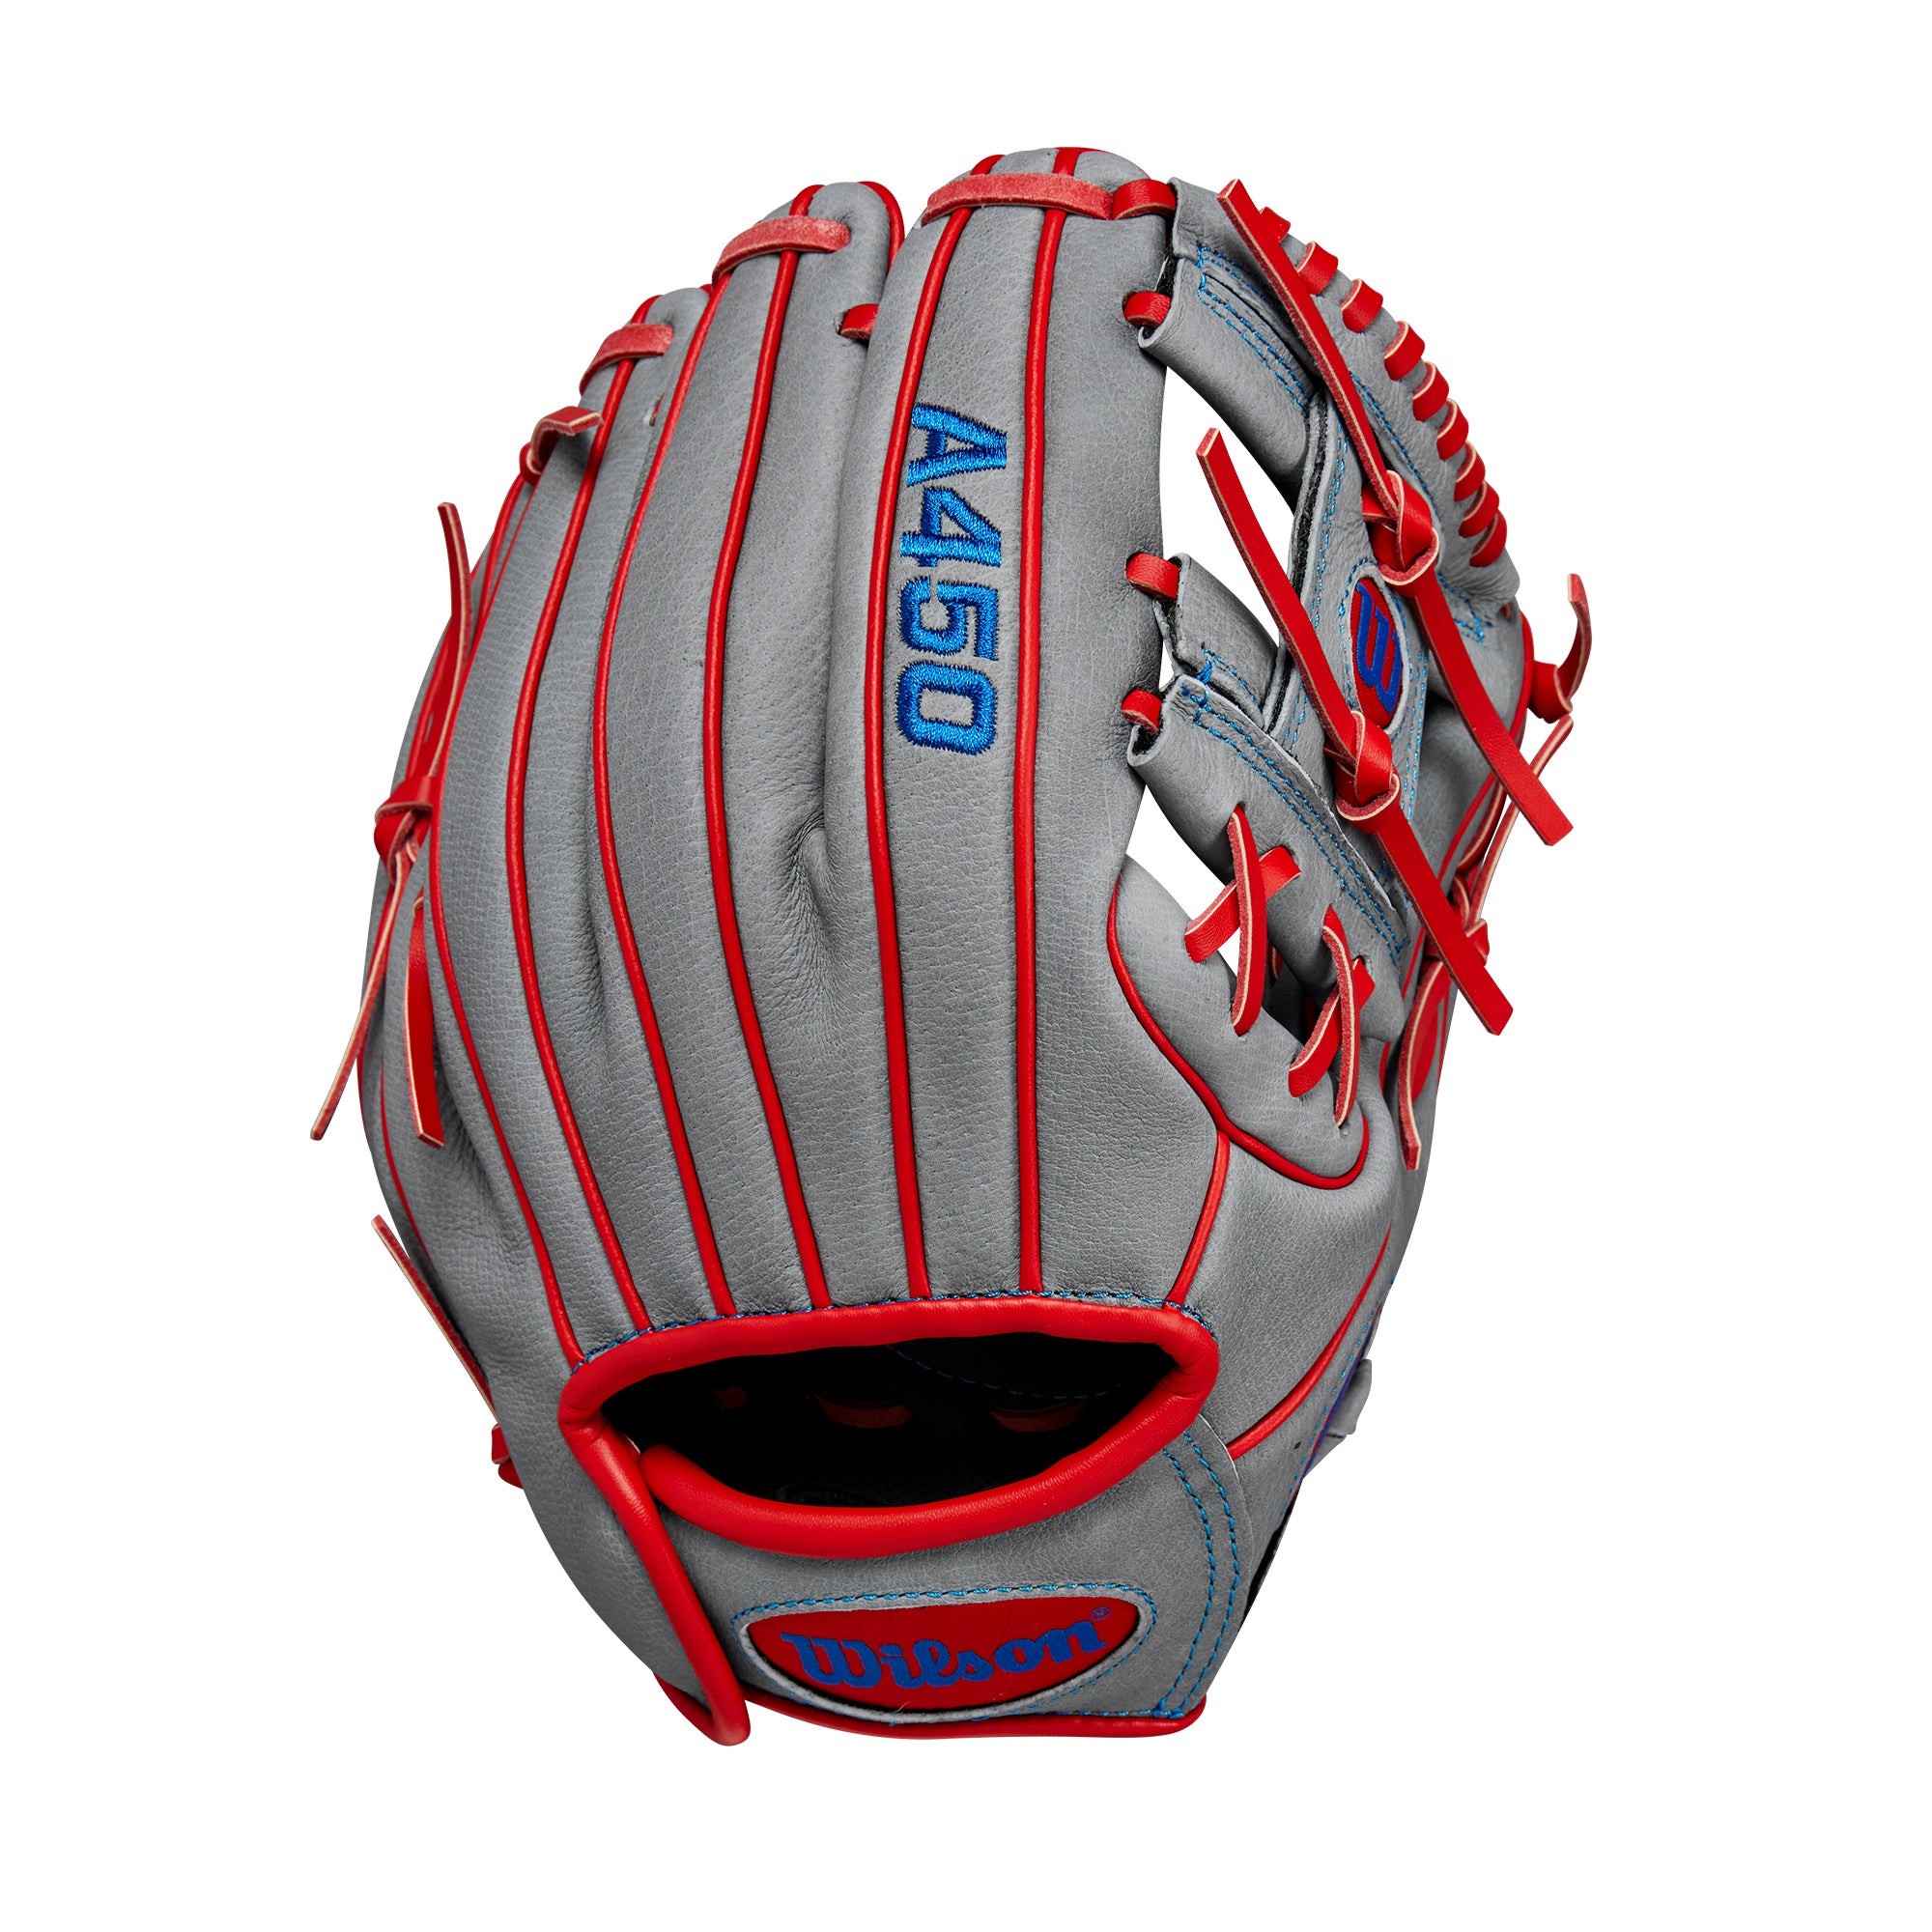  WILSON Sporting Goods WILSON Youth League and